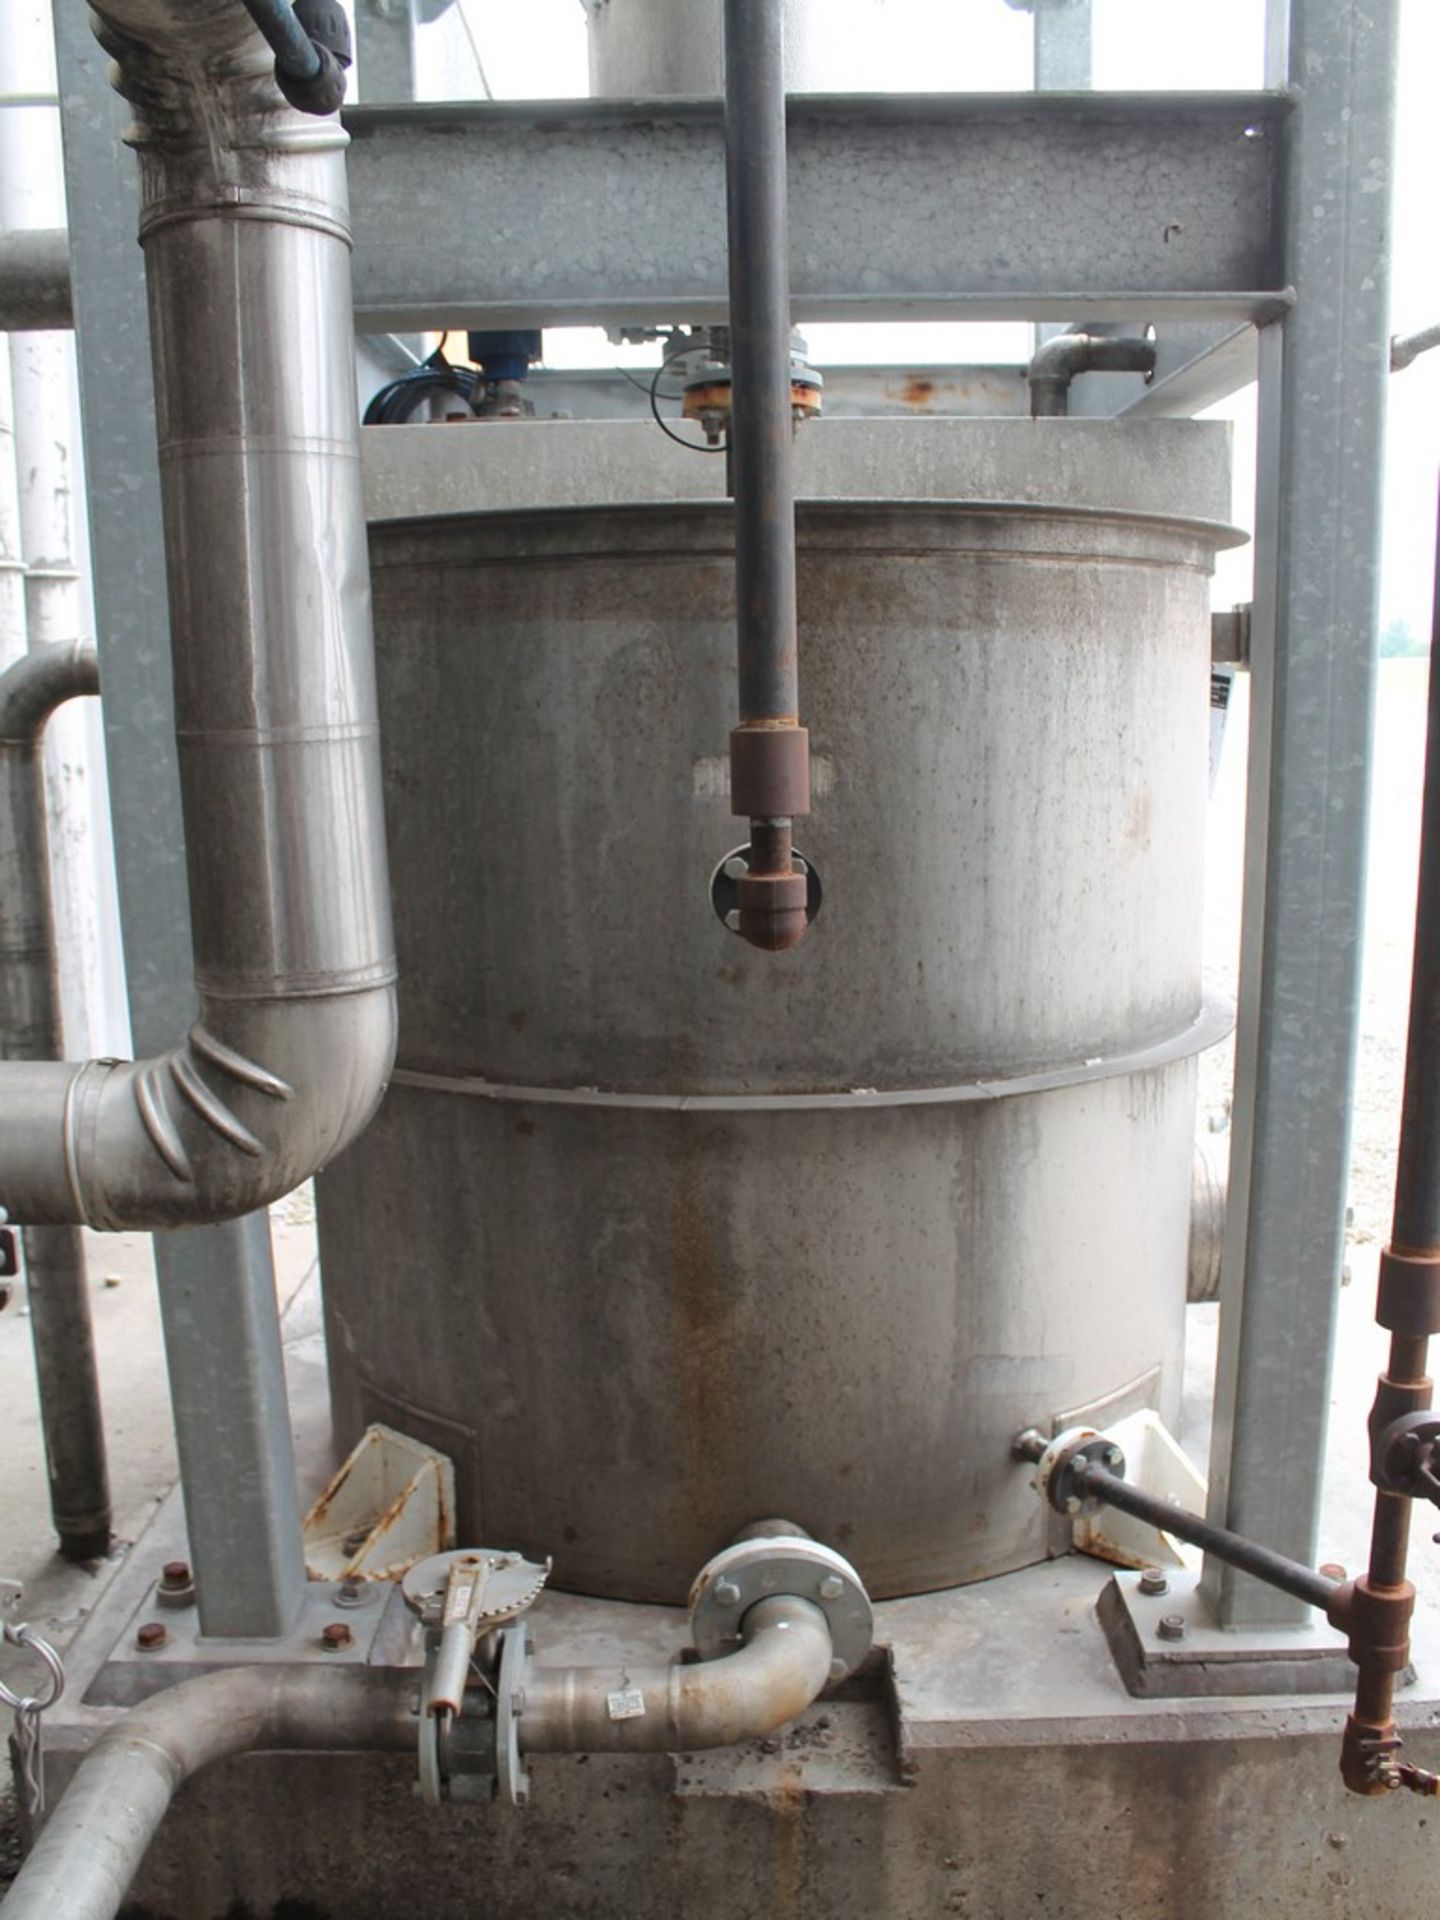 INTERNATIONAL PRODUCTION SPECIALISTS INC. LOT STAINLESS STEEL WASH SOLVENT TANK - Image 8 of 13